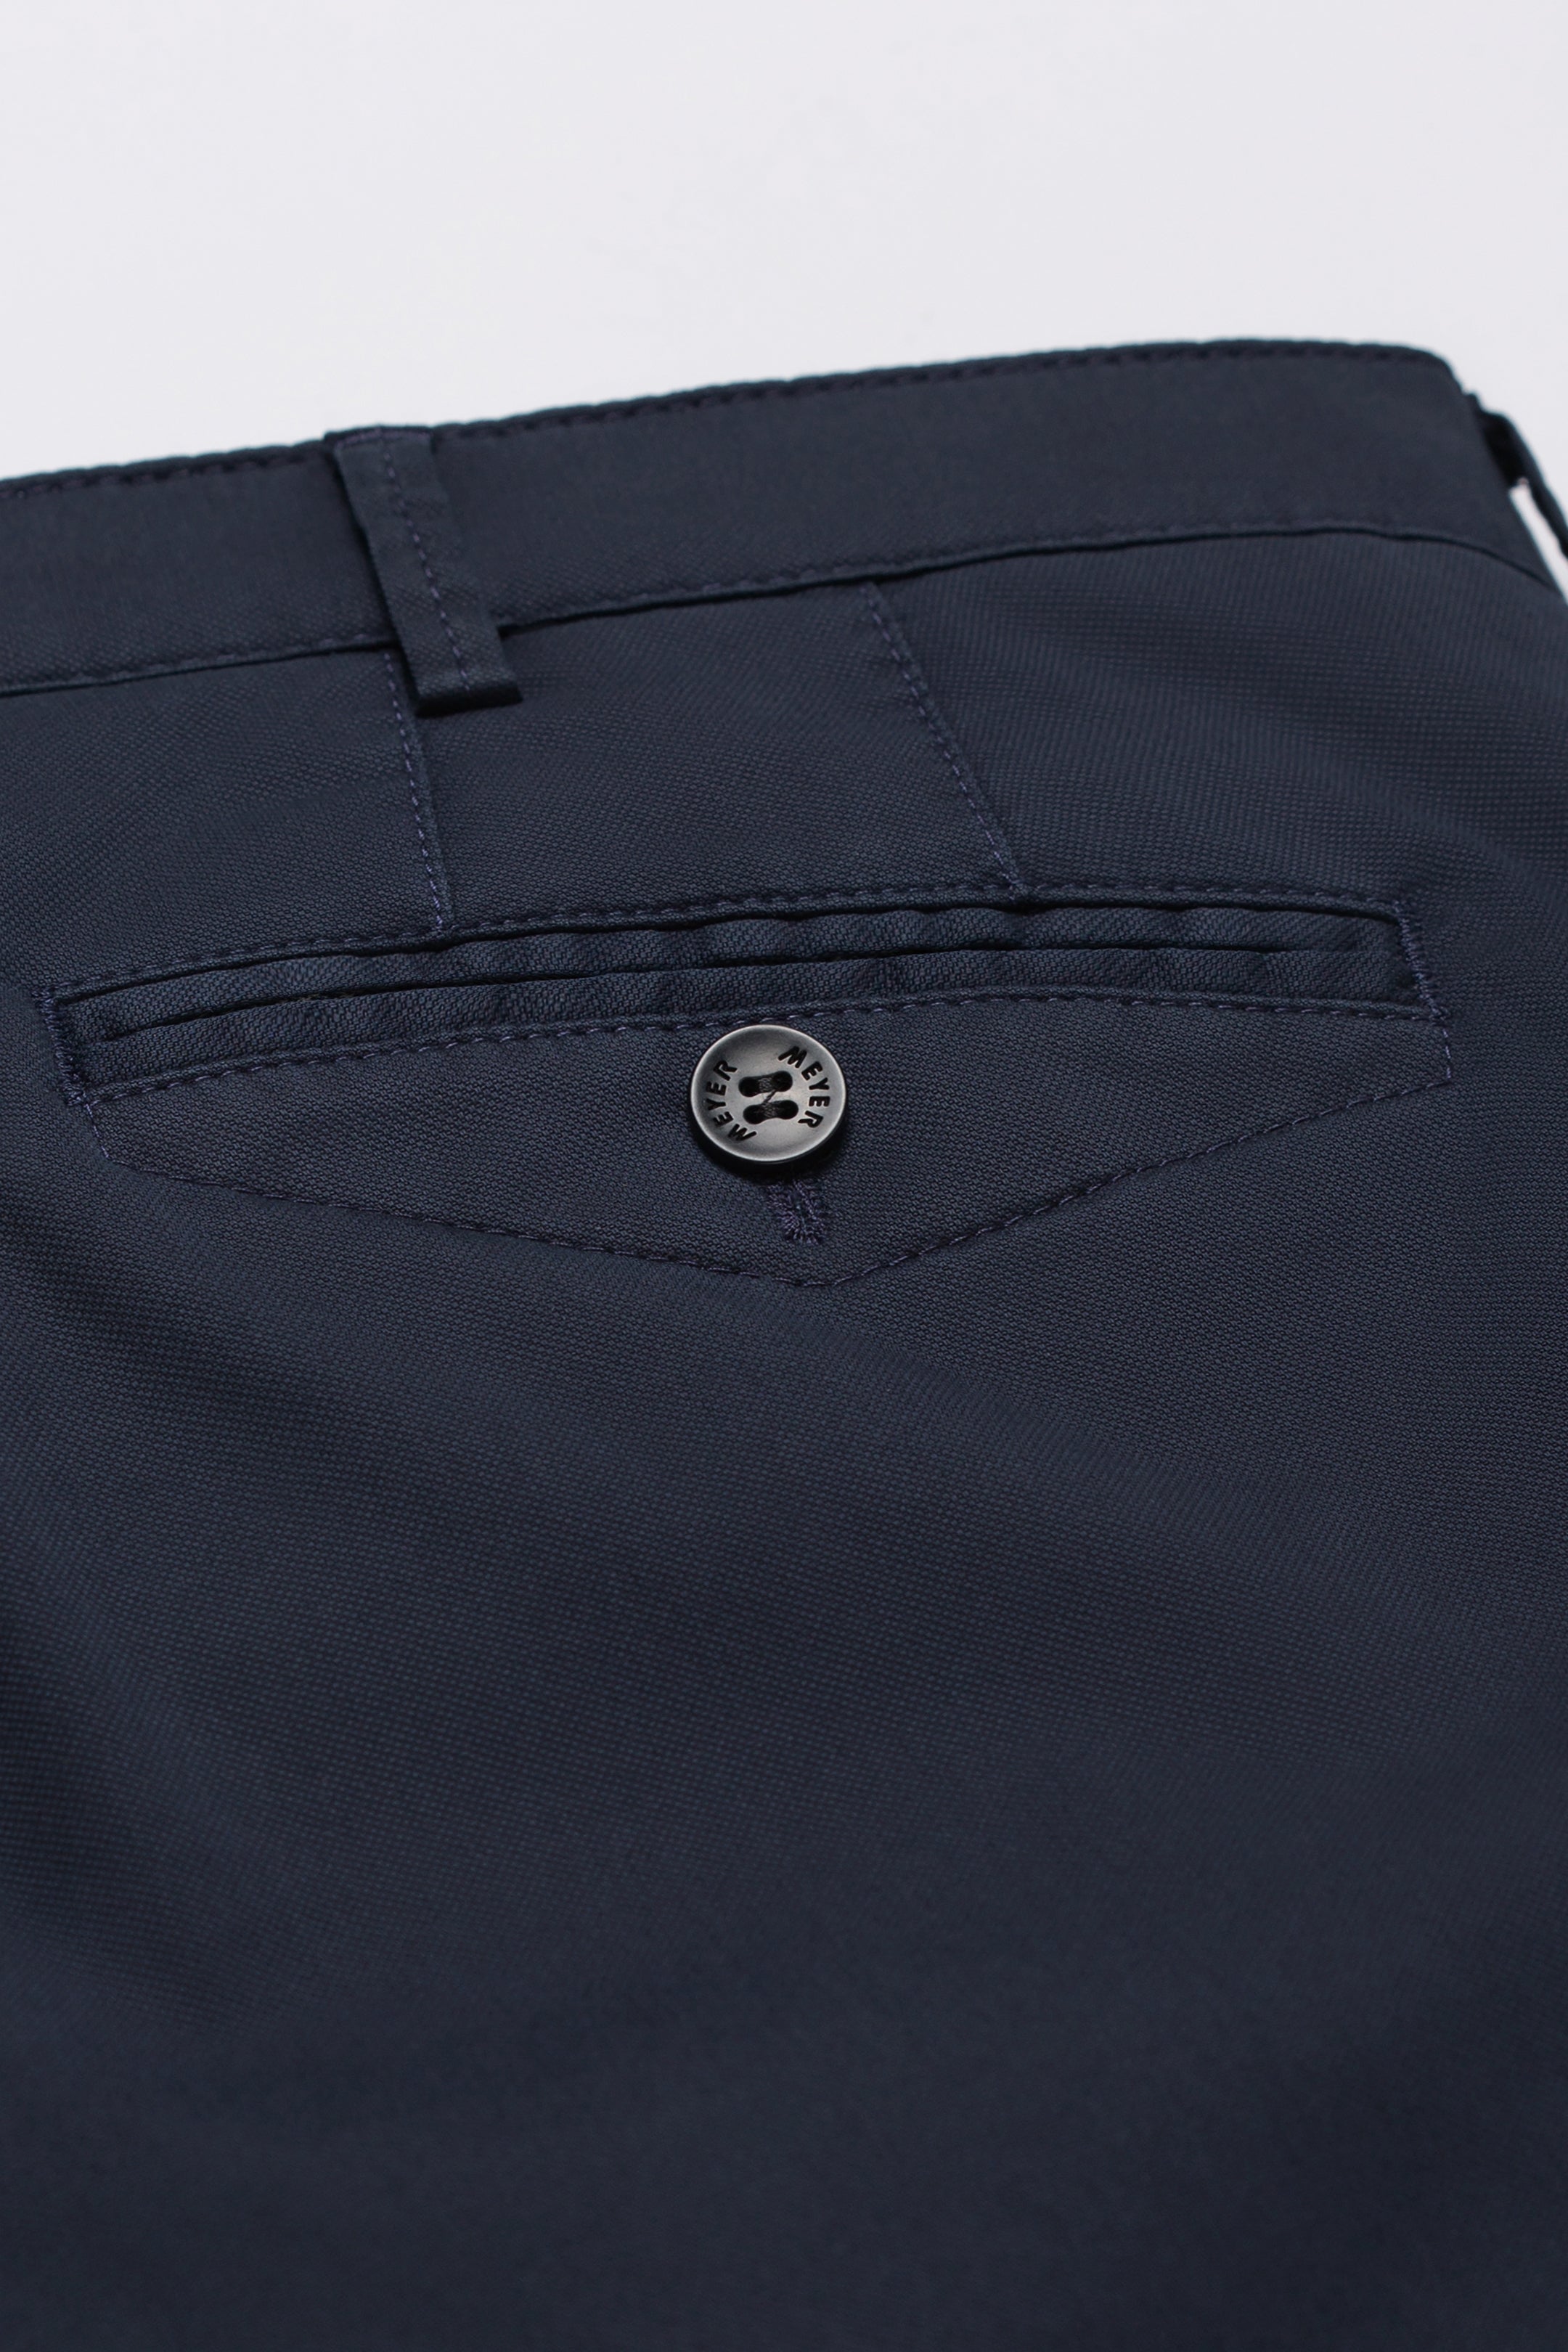 30% OFF - MEYER Chicago Trousers - 5060 Lightweight Cotton Chino - Navy